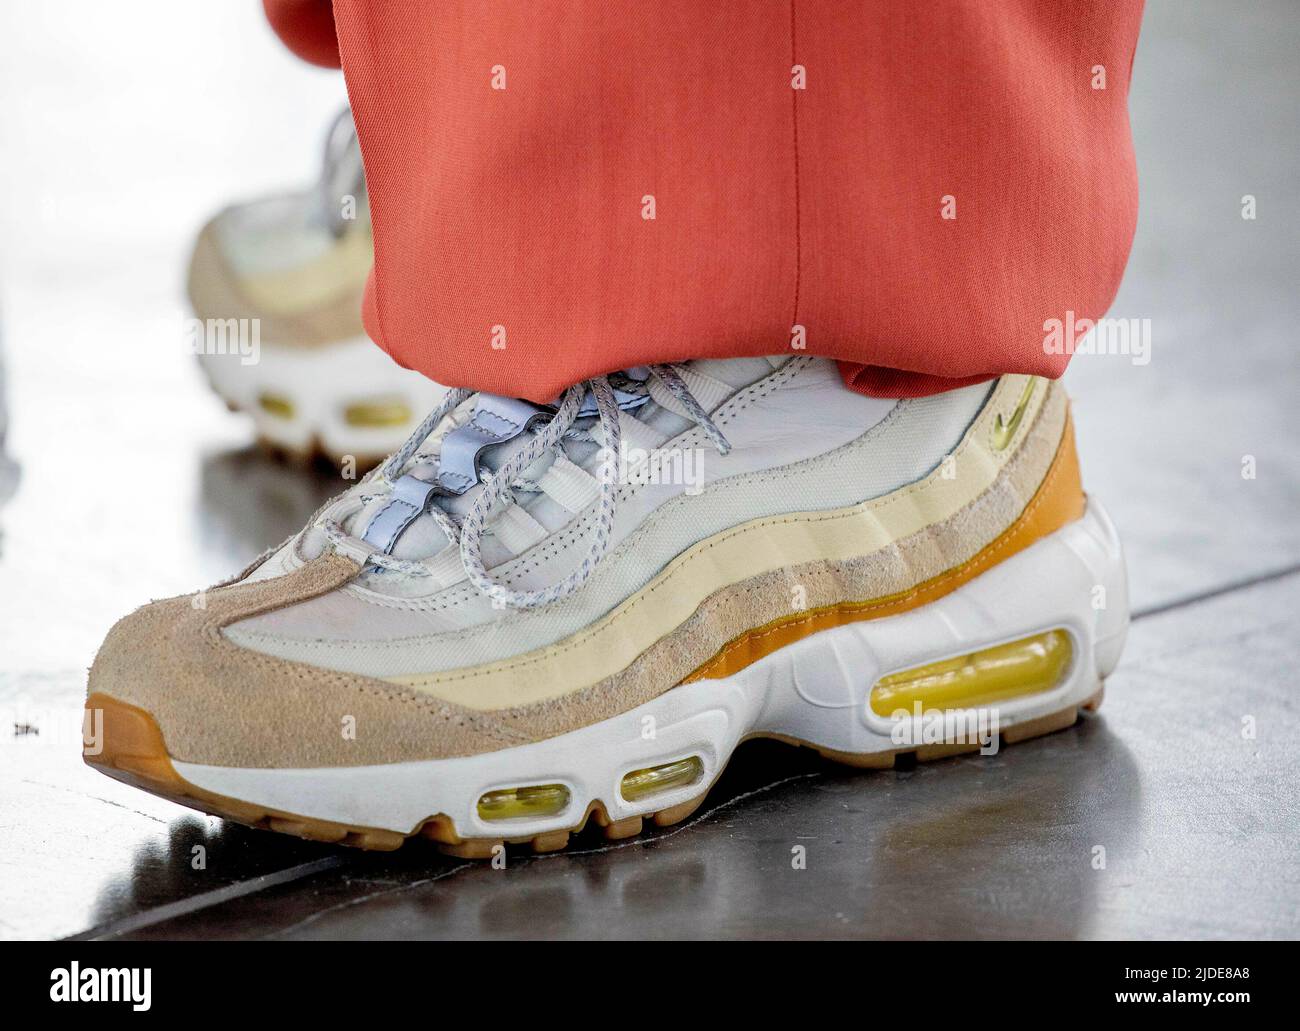 Shoes danish crown mary stock photography and images - Alamy